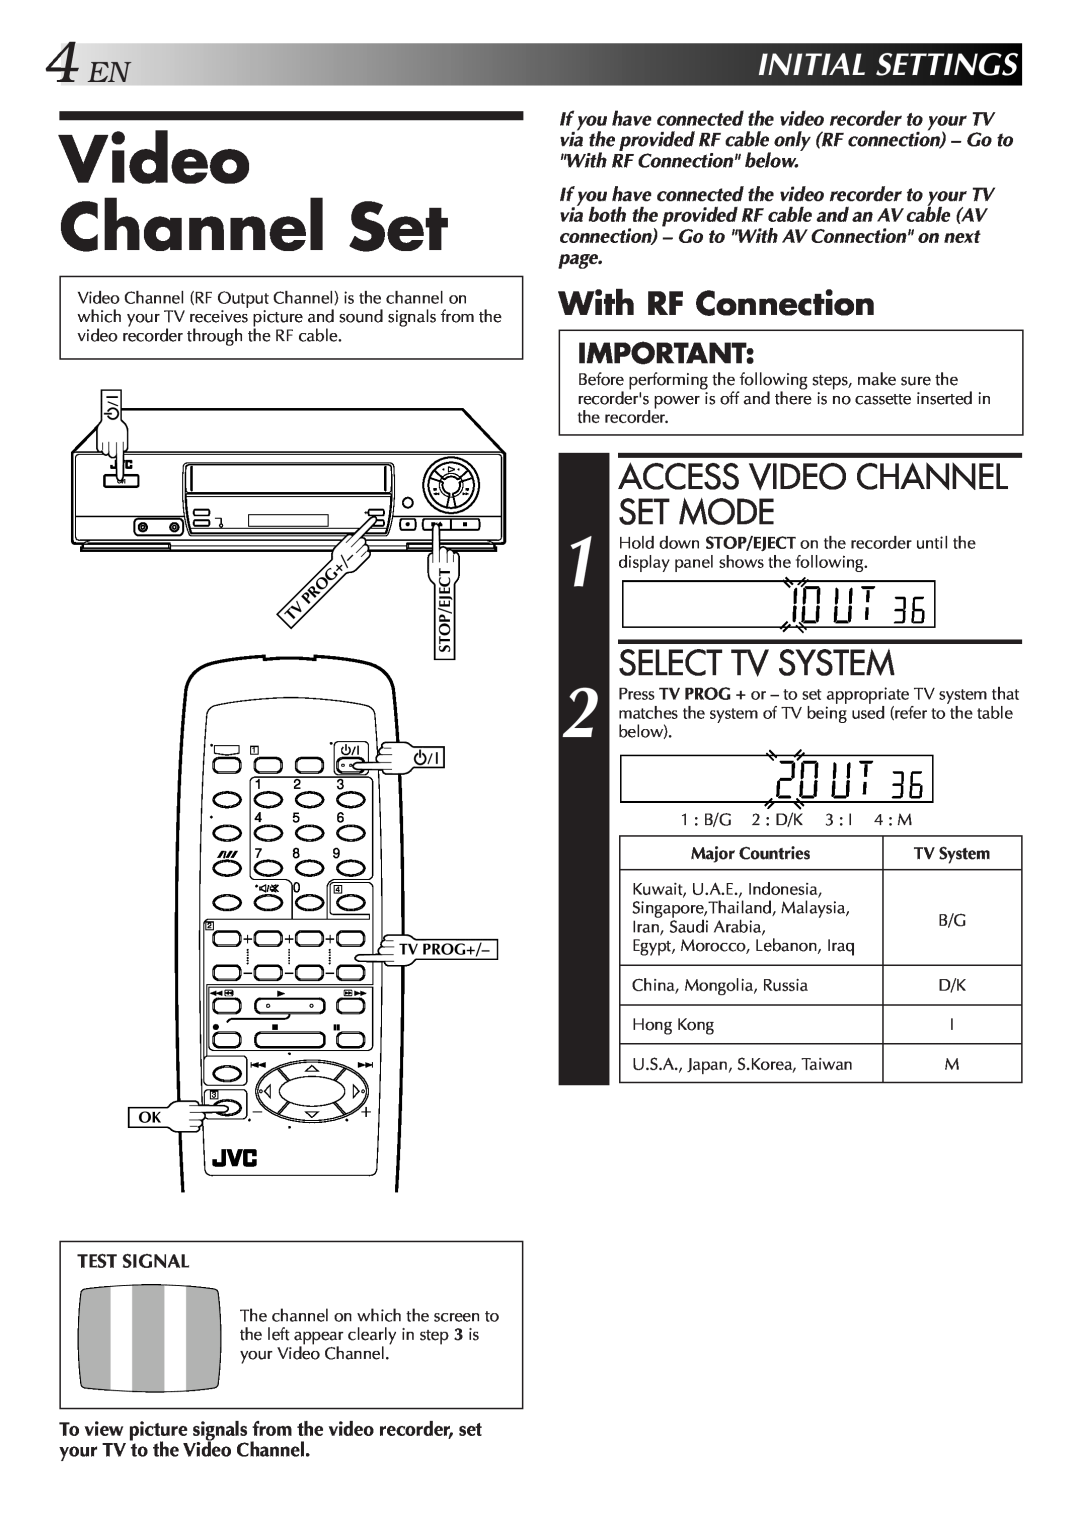 JVC HR-J457MS specifications Access Video Channel Set Mode, 4ENINITIALSETTINGS, With RF Connection, Select Tv System 